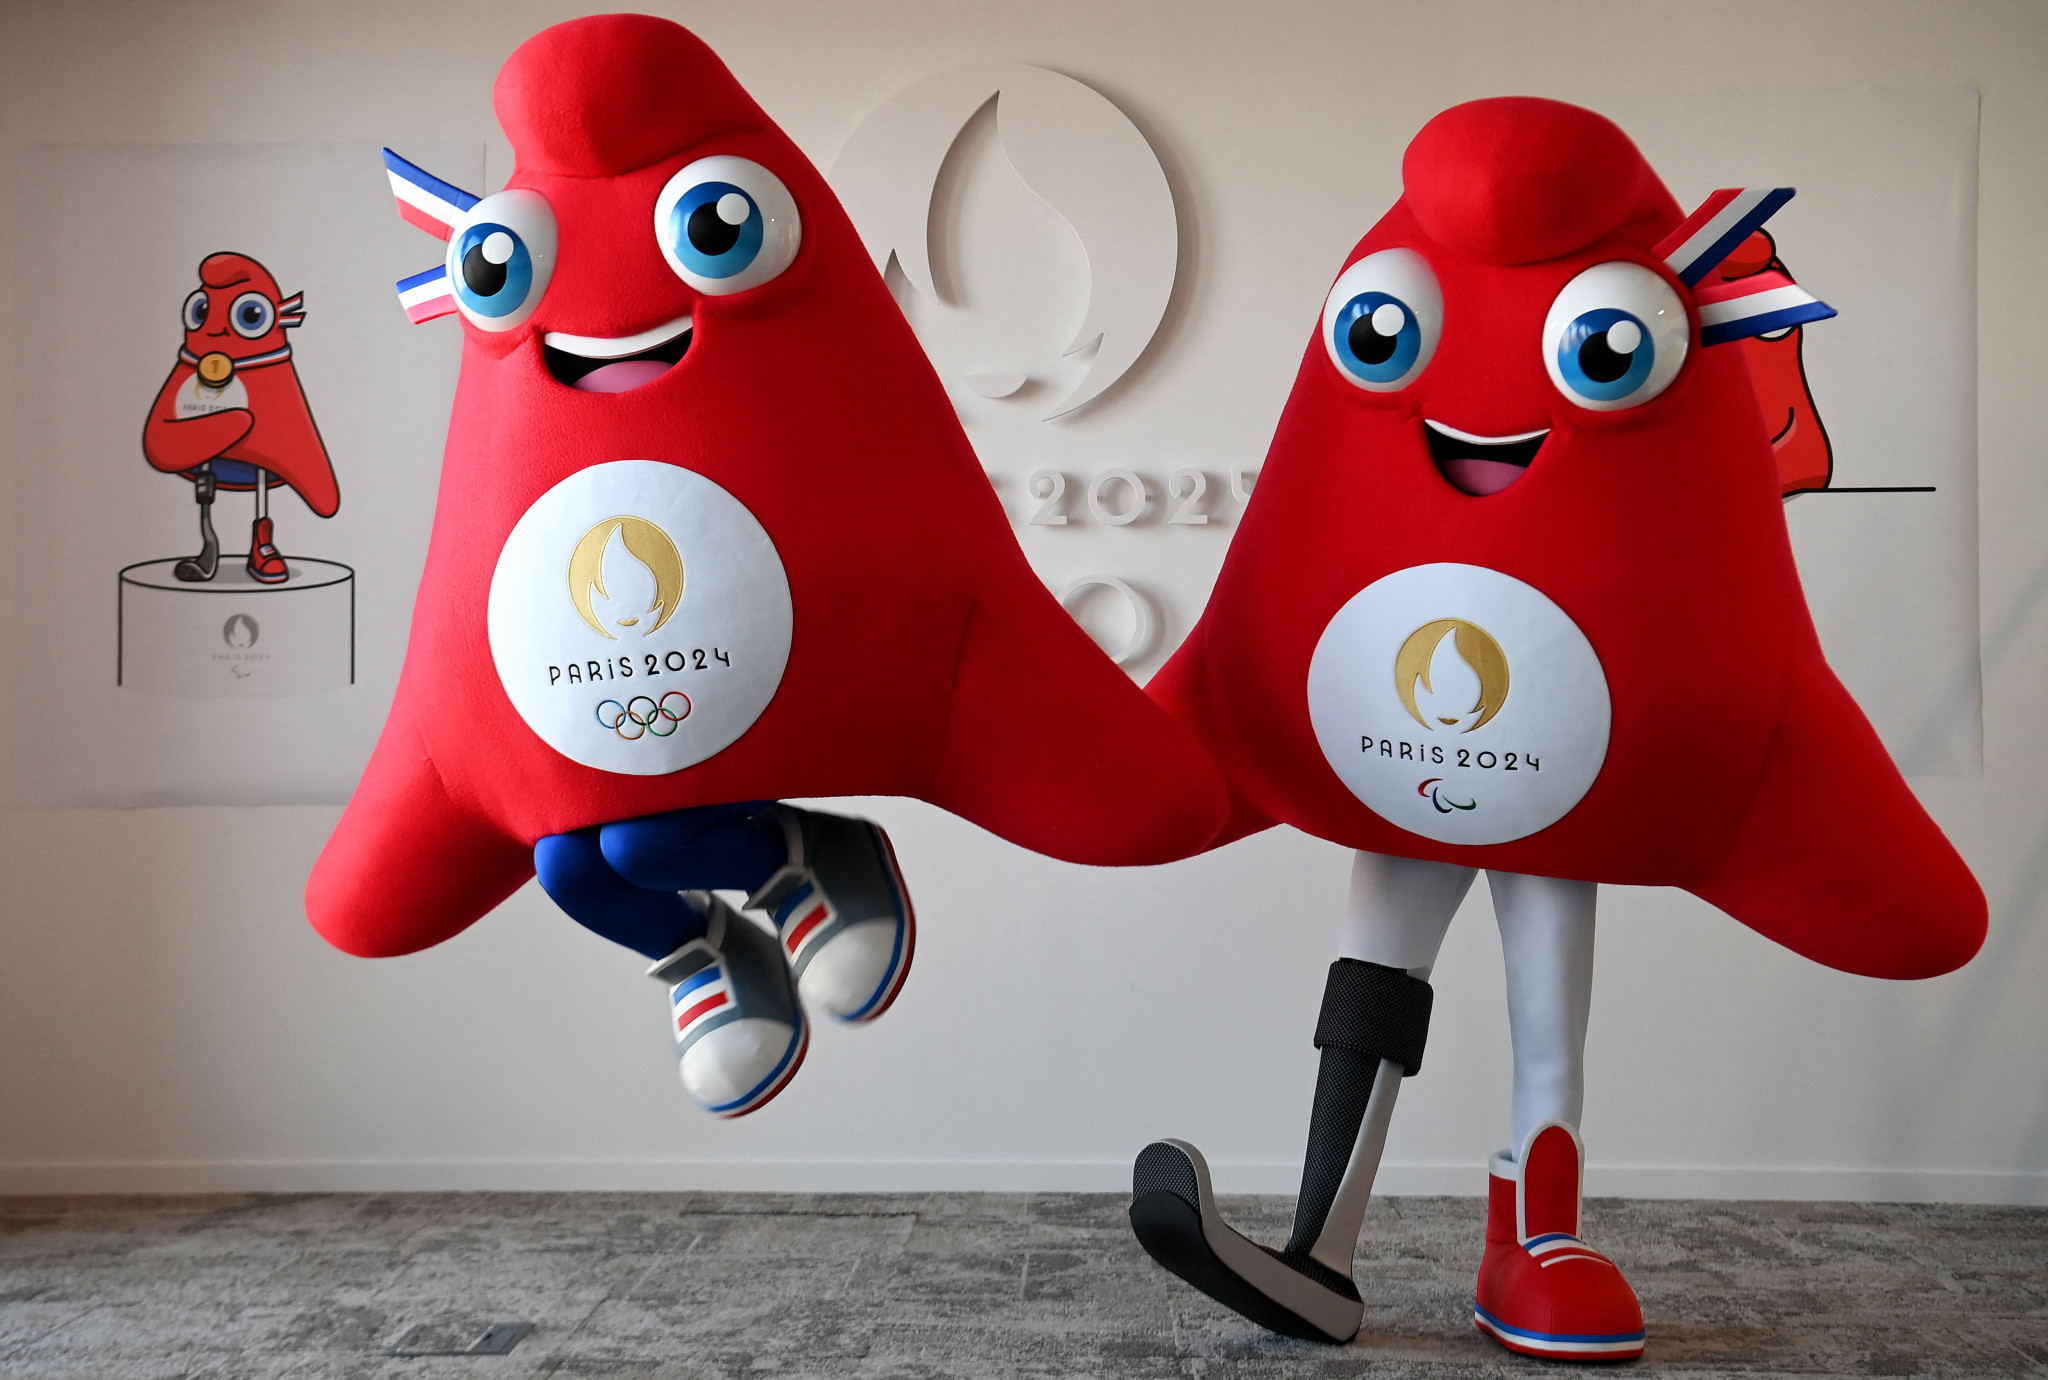 The Paris 2024 mascots were revealed as two Phrygian caps - the ...